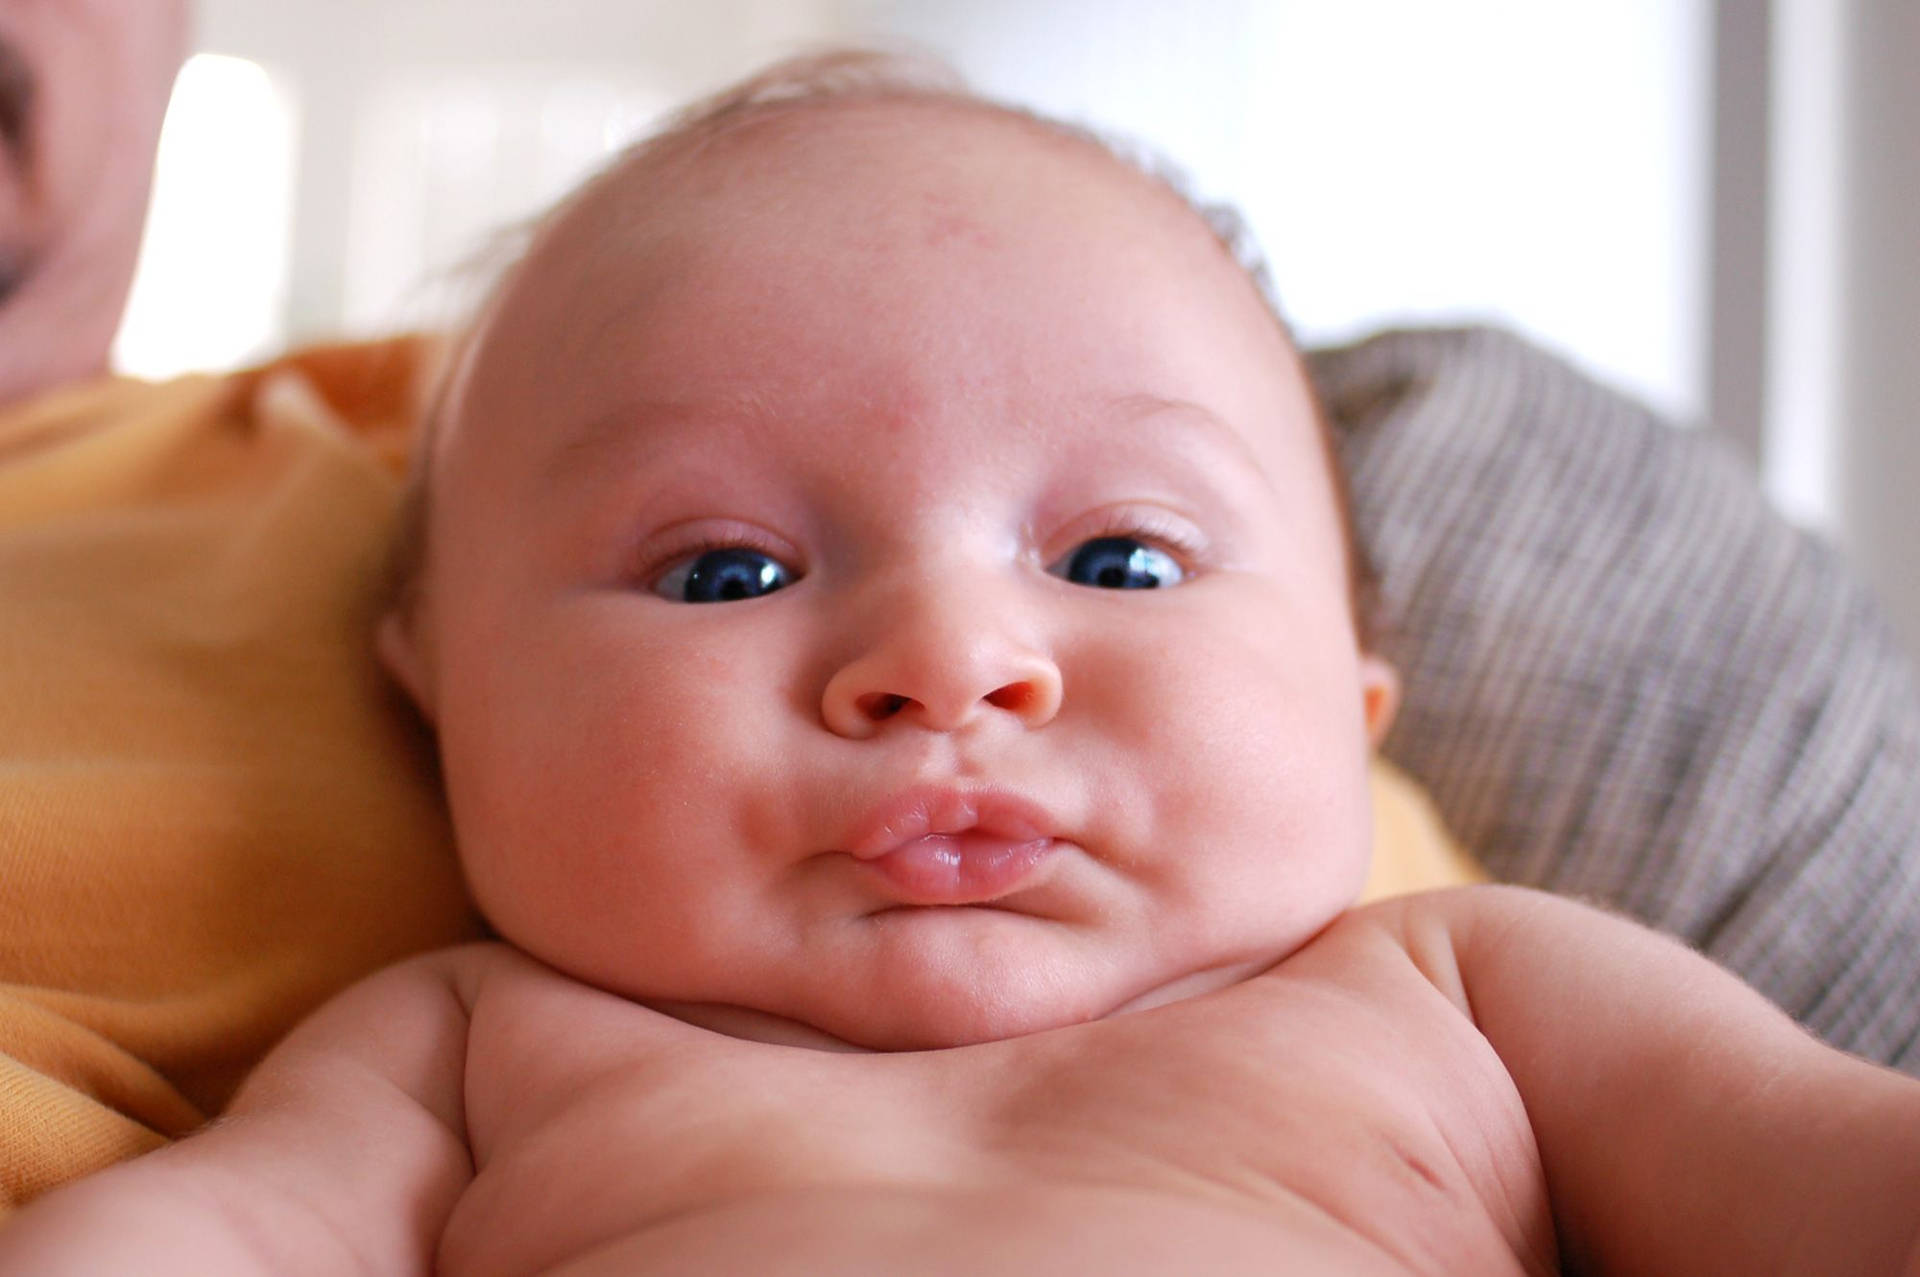 Free Funny Baby Wallpaper Downloads, [100+] Funny Baby Wallpapers for FREE  